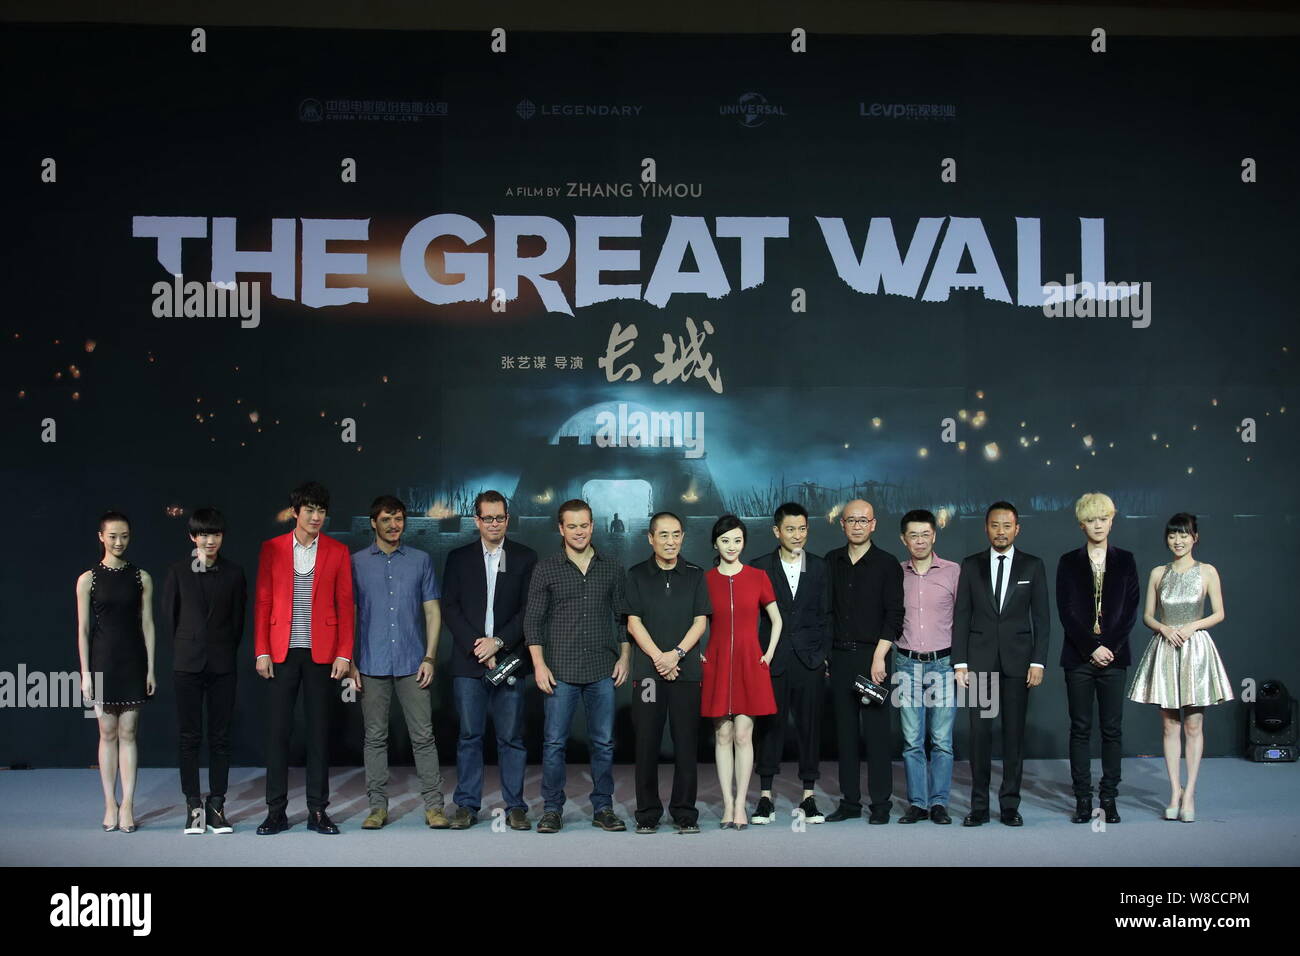 The Cast And Director Attend A Press Conference For Their New Movie The Great Wall In Beijing China 2 July 15 Stock Photo Alamy